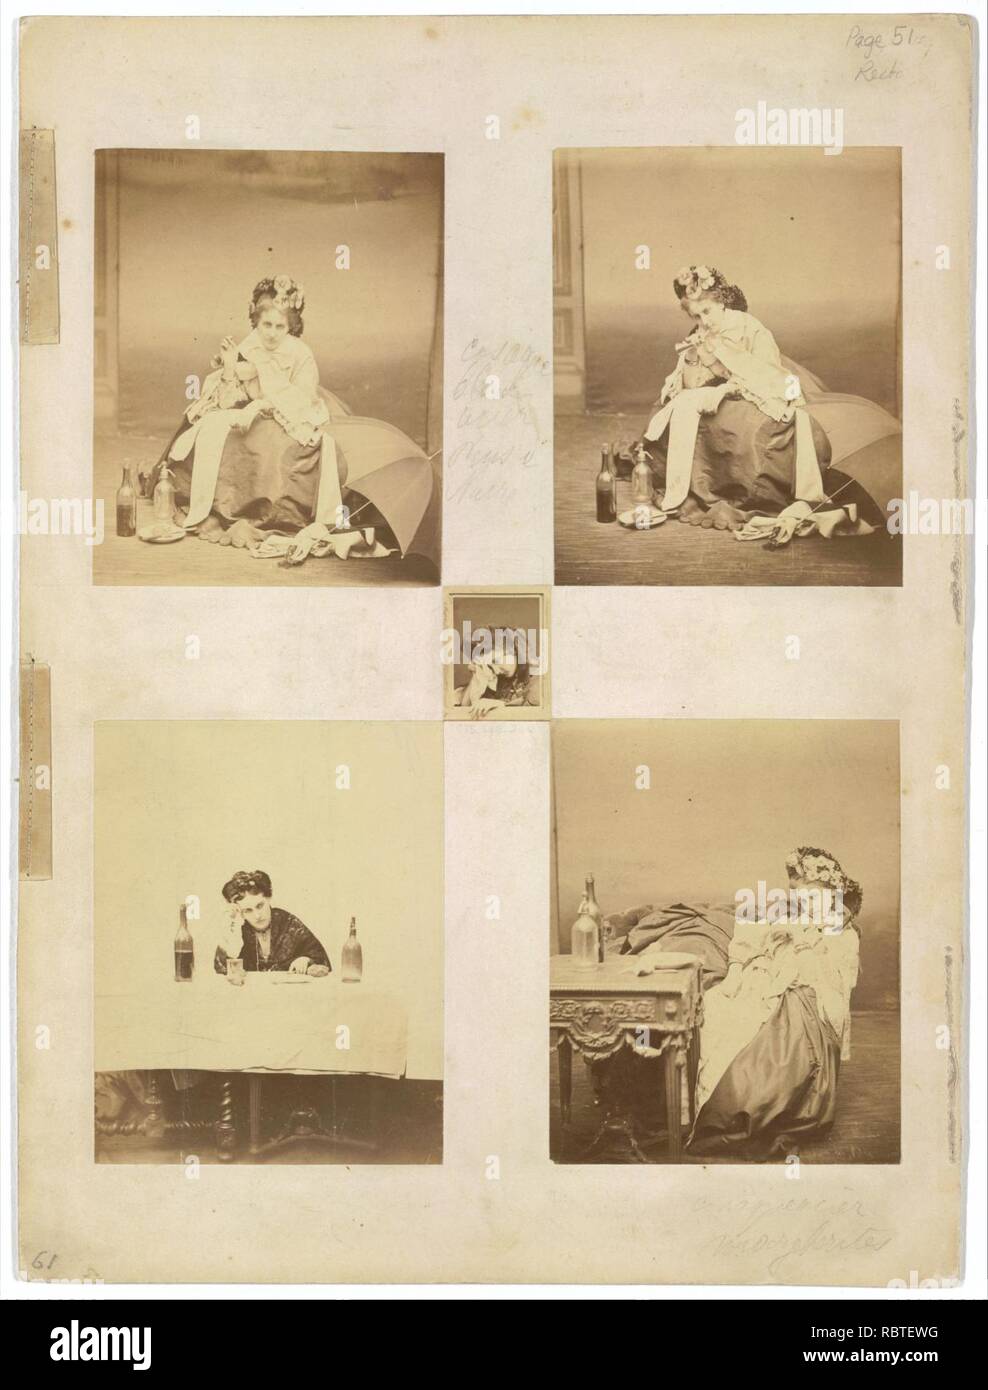 -Album page with ten photographs of La Comtesse mounted recto and verso- Stock Photo